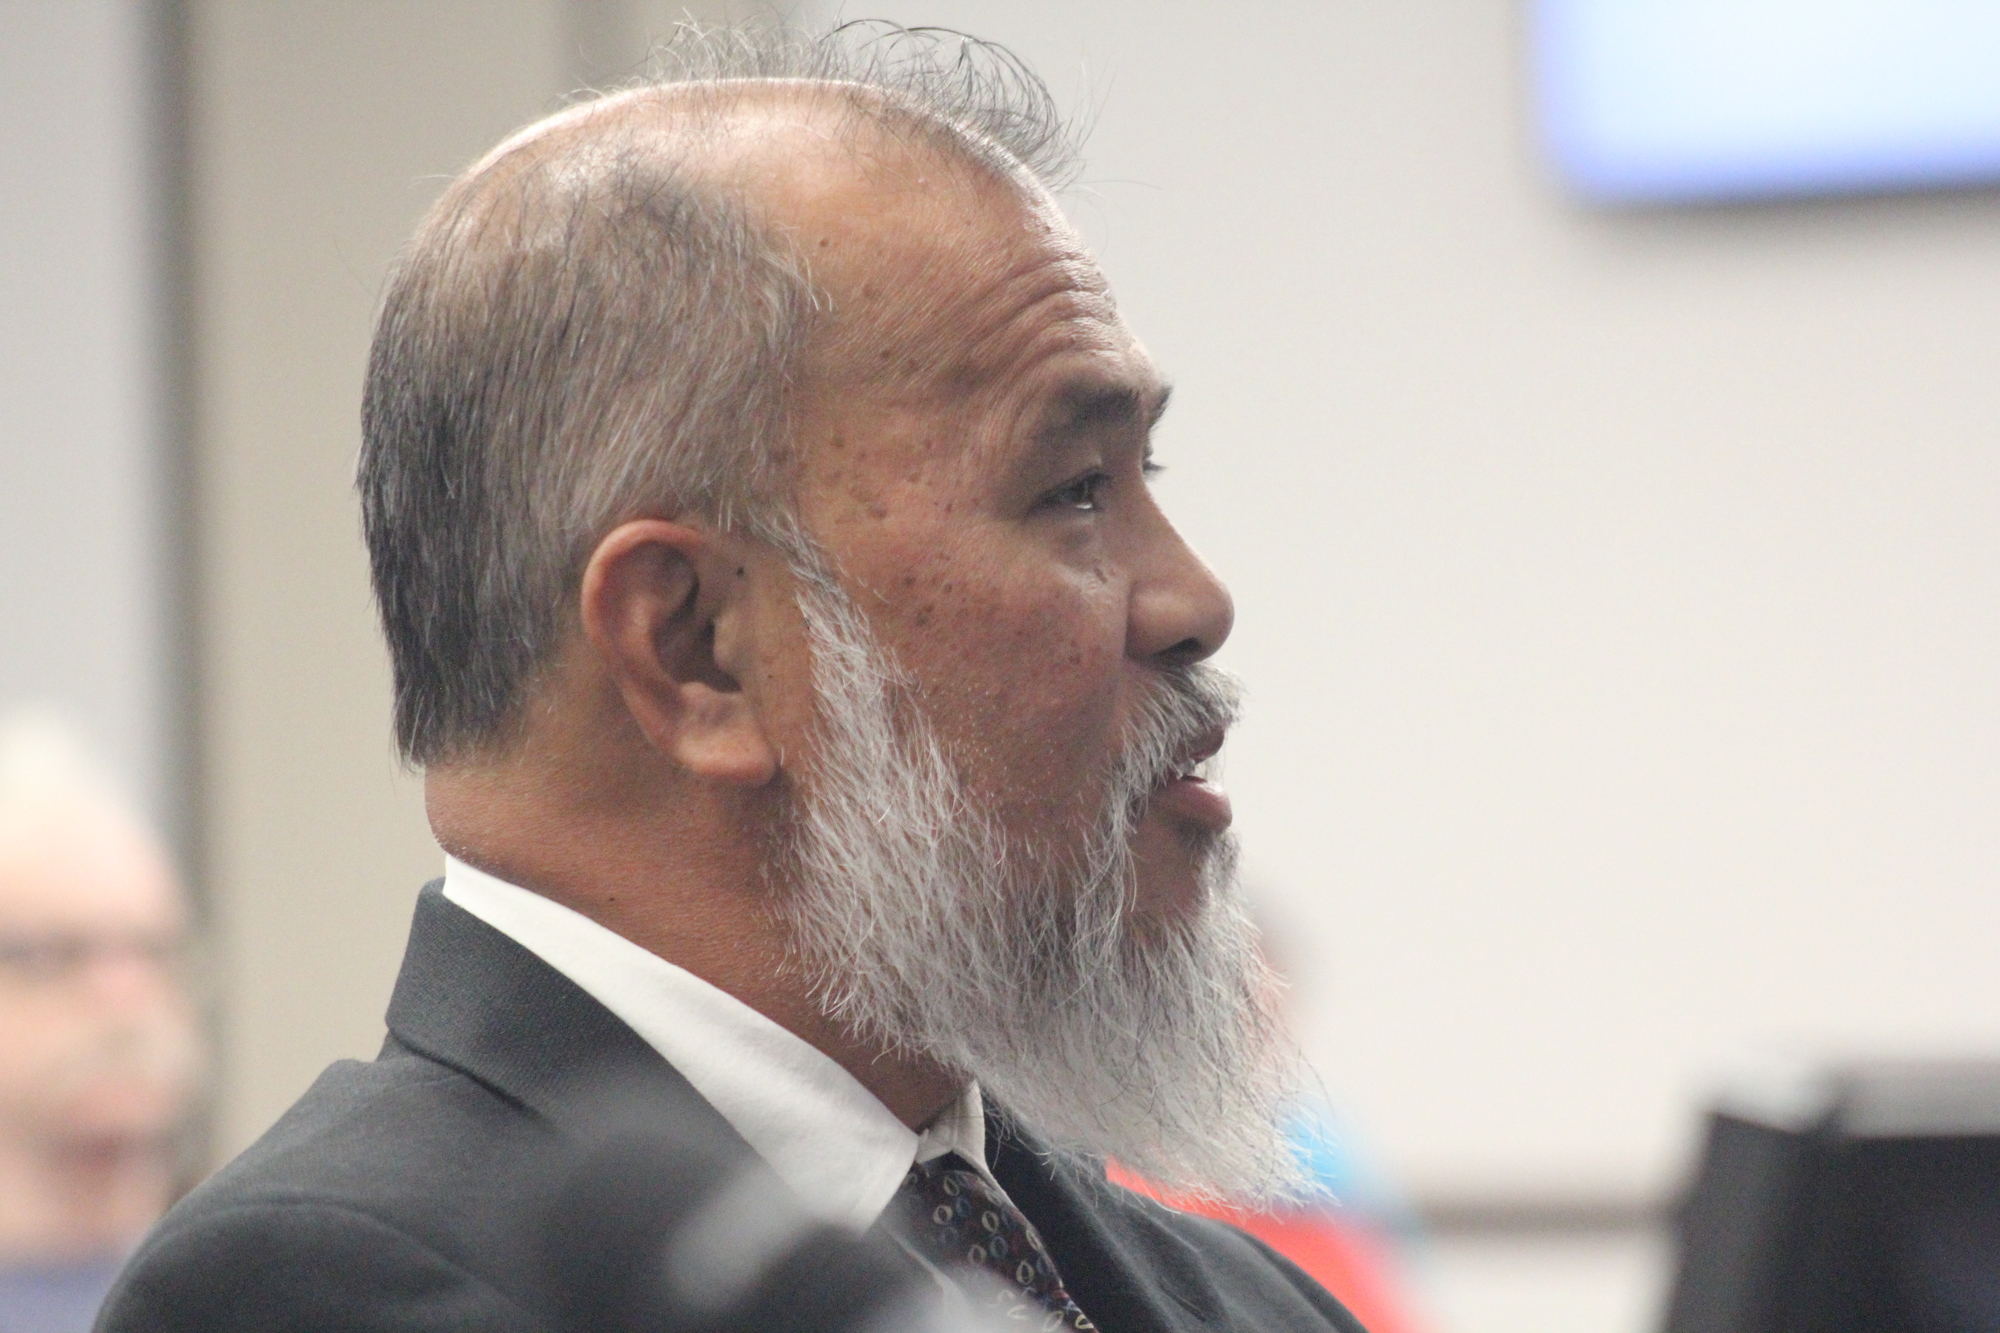 Jose Papa, senior planner, reported on the demographics of the city to the Palm Coast City Council as part of the CDBG requirements. Photo by Brian McMillan